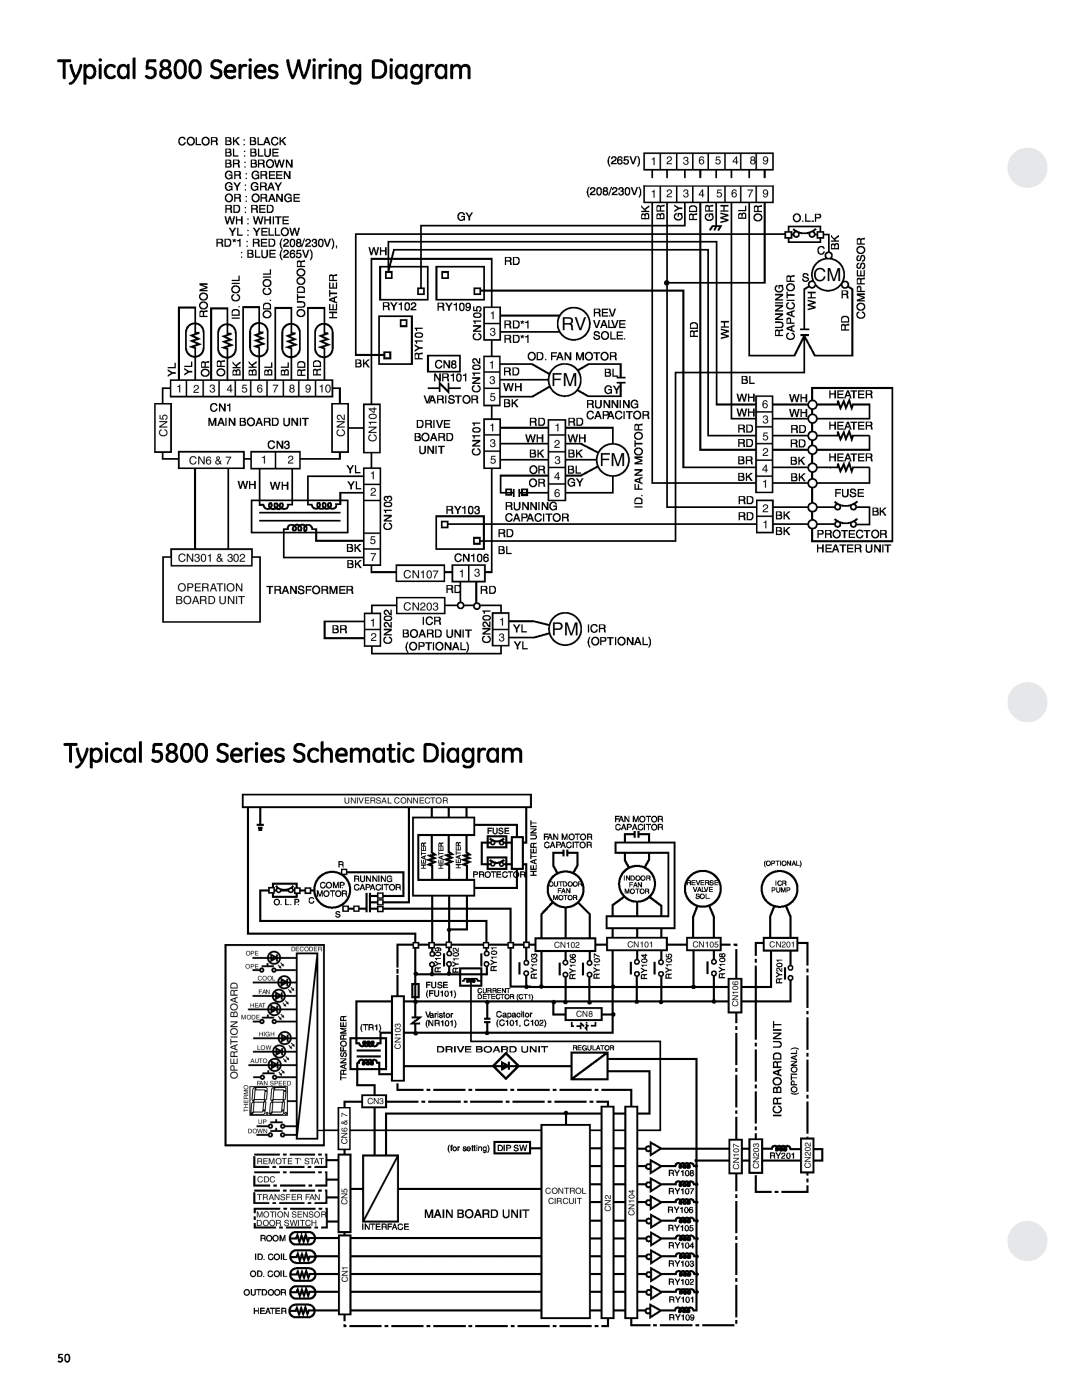 GE 2800 manual Typical 5800 Series Schematic Diagram, Typical 5800 Series Wiring Diagram, Pm Icr 